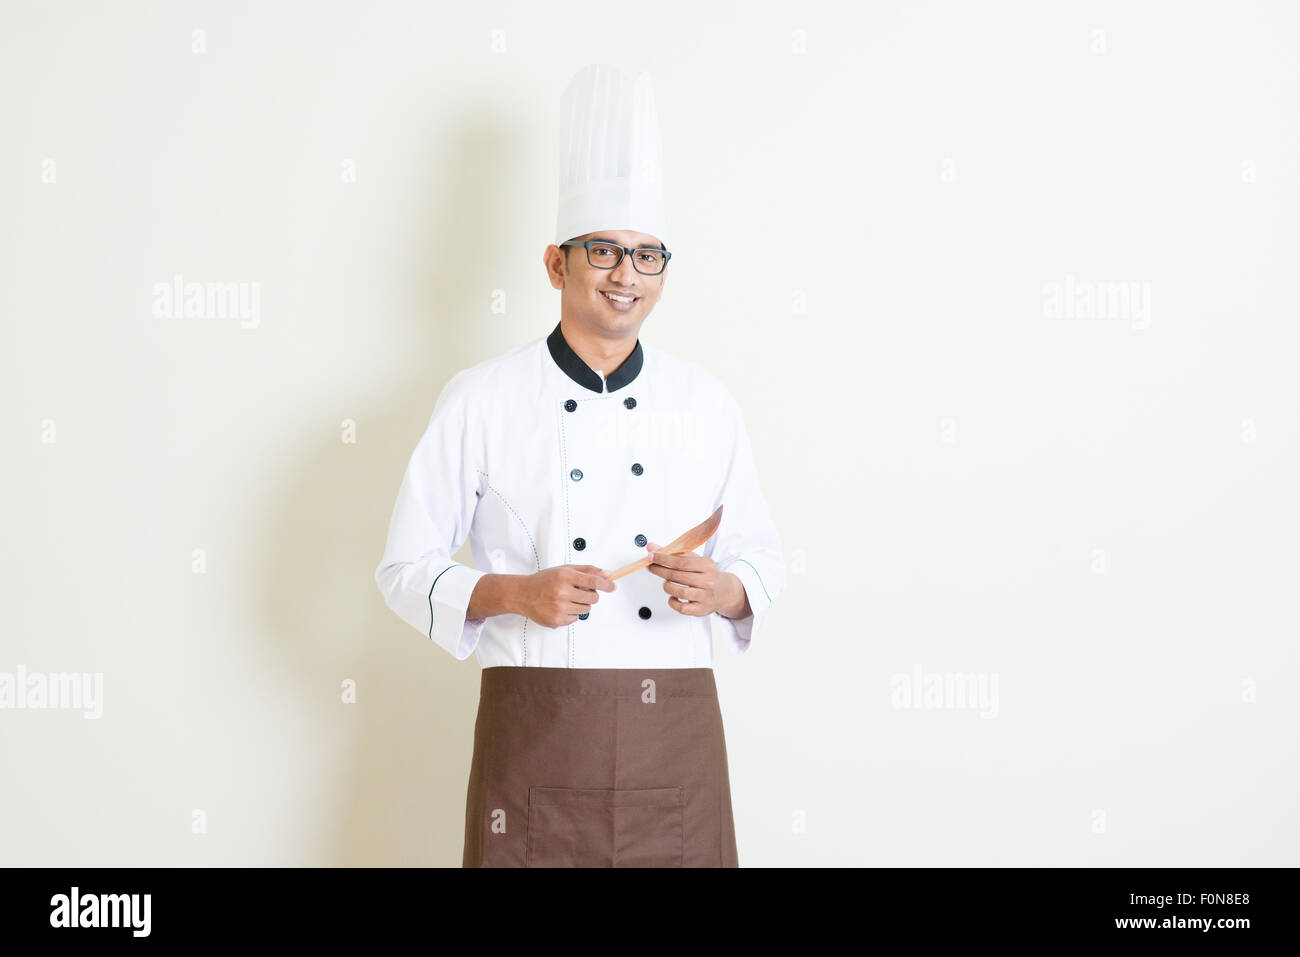 Portrait of handsome Indian male chef in uniform hand holding spatula and smiling confidently, standing on plain background with Stock Photo